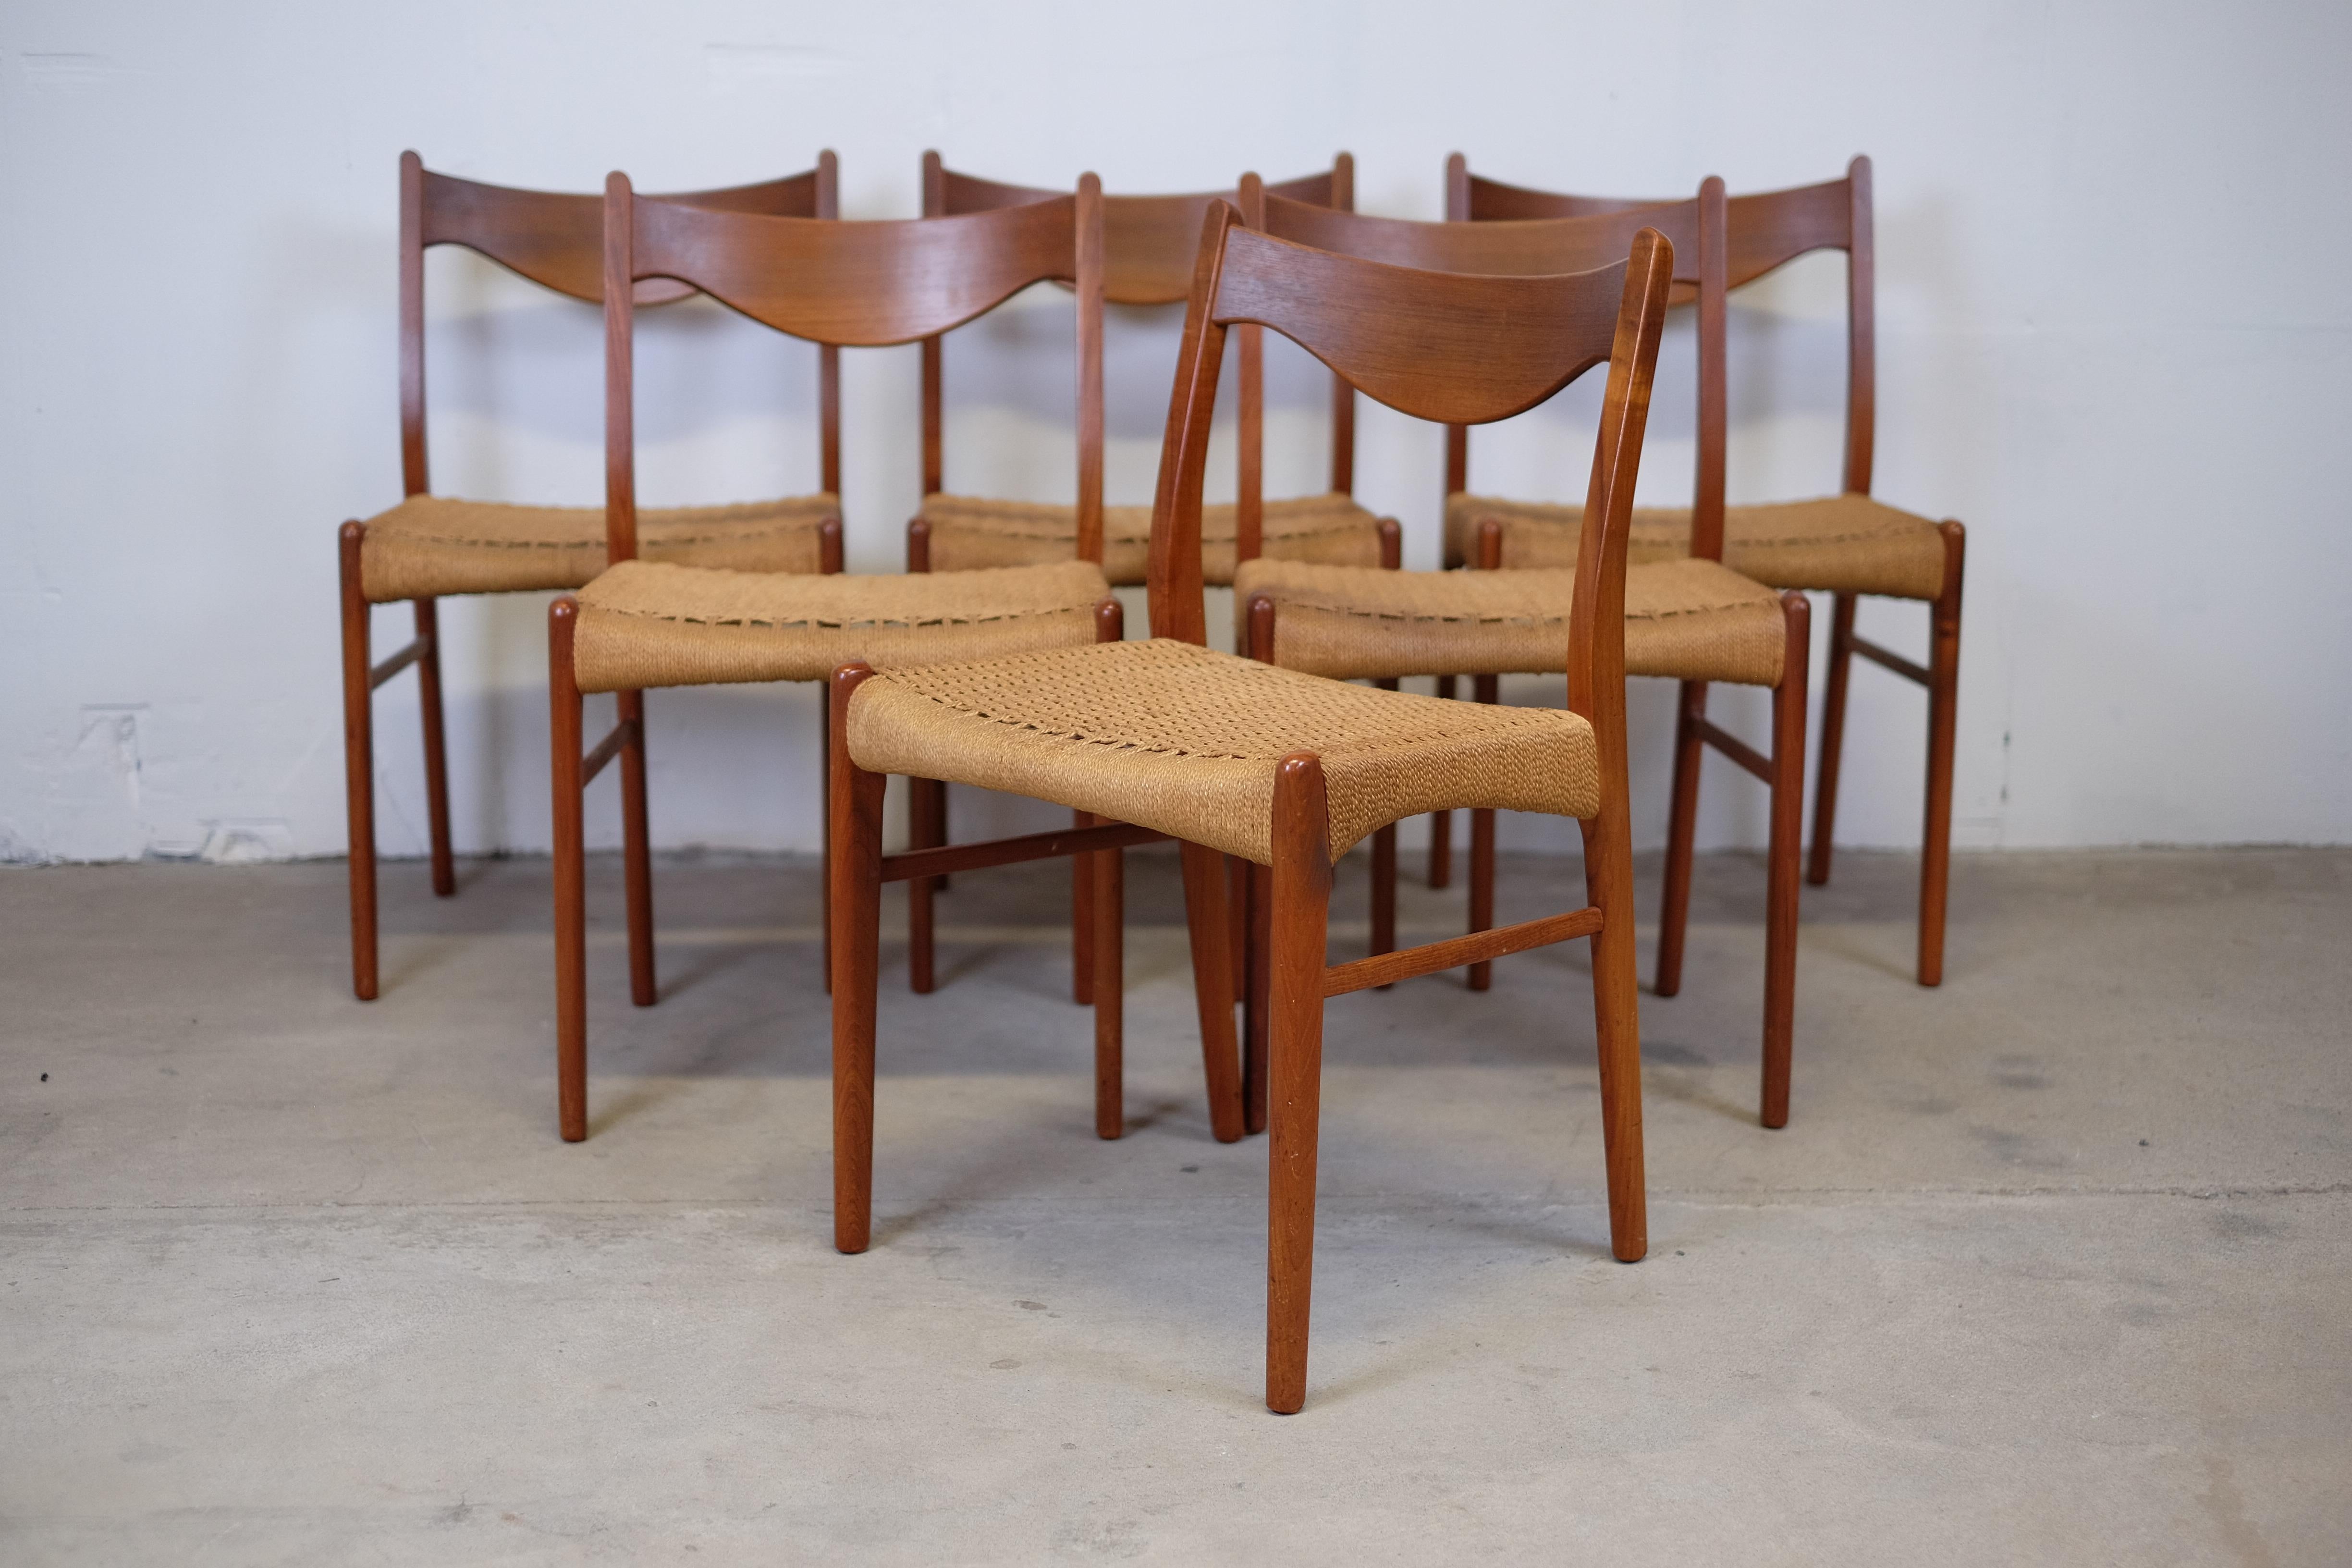 These chairs features solid teak frame with woven cord. The chairs are designed by Arne Wahl Iversen for Glyngøre Stolefabrik. 
These chairs have beautiful, refined details such as the curved seat sides and sculptural backrest.

The chairs are in